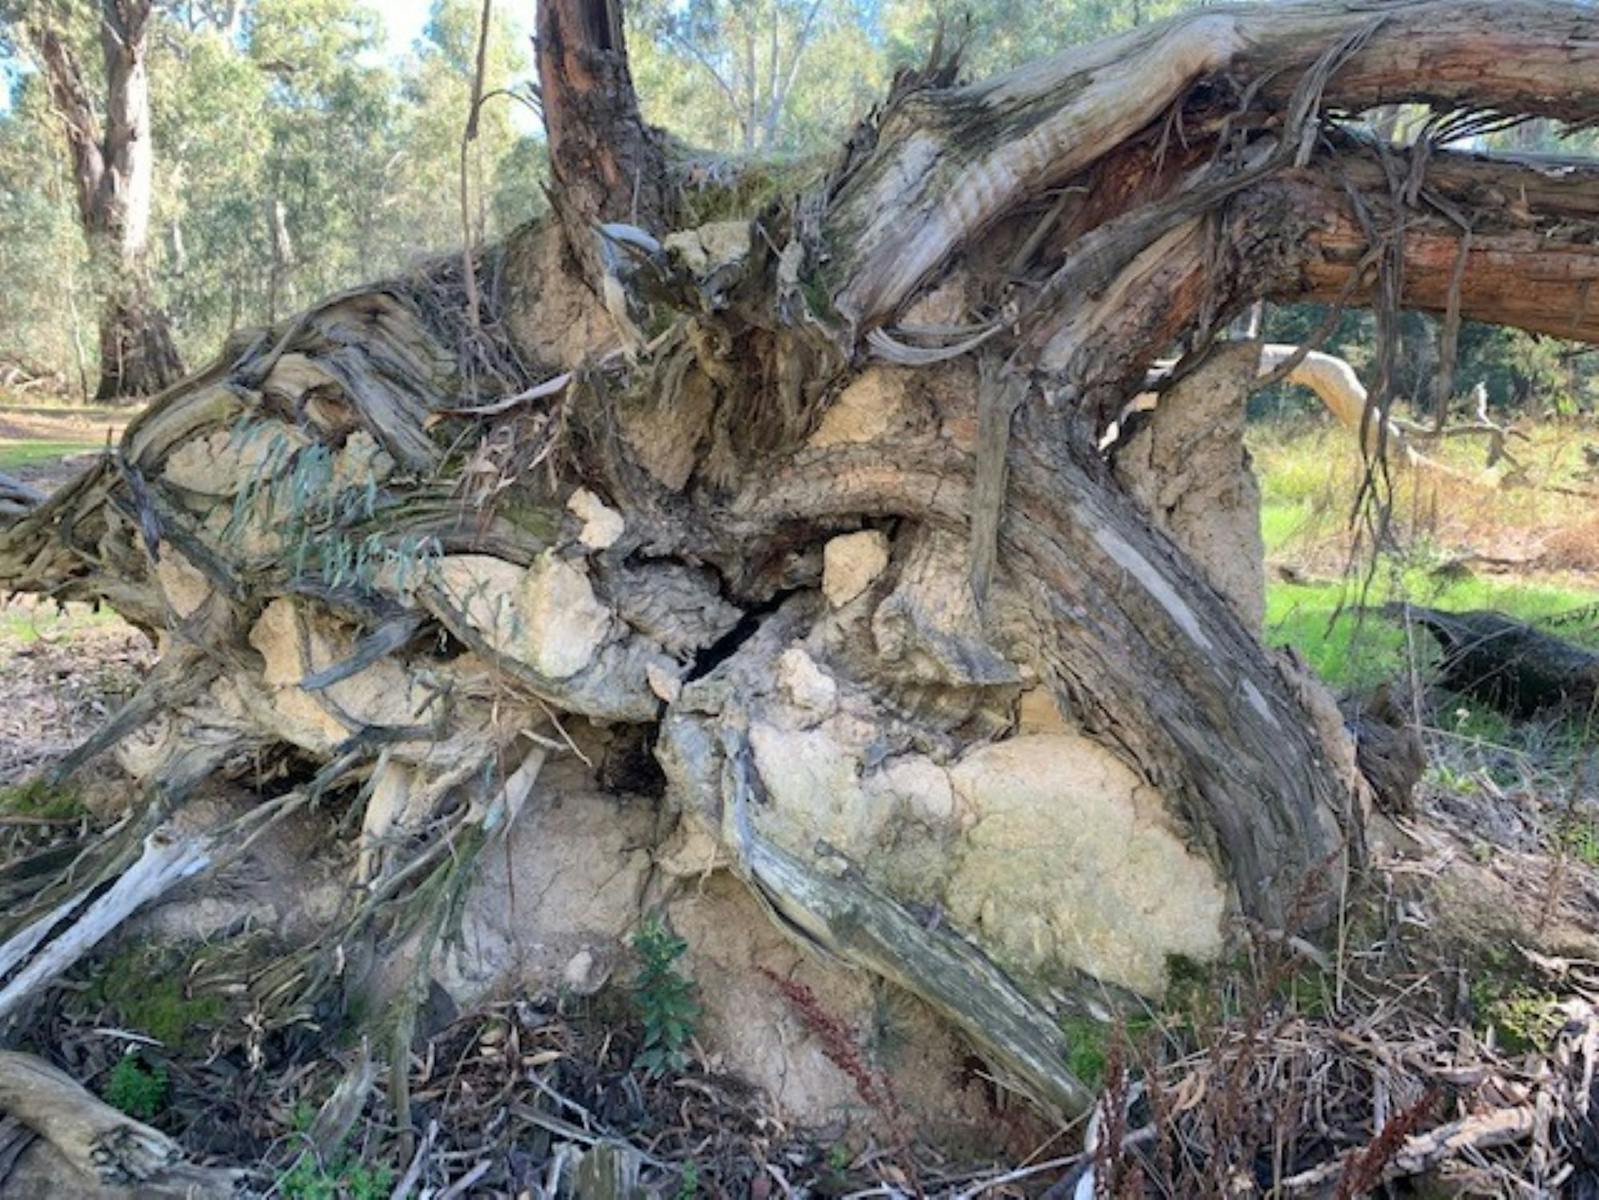 Root system of fallen tree, clay, dirt, dried leaves, branches, bark, sunshine, grass, trees